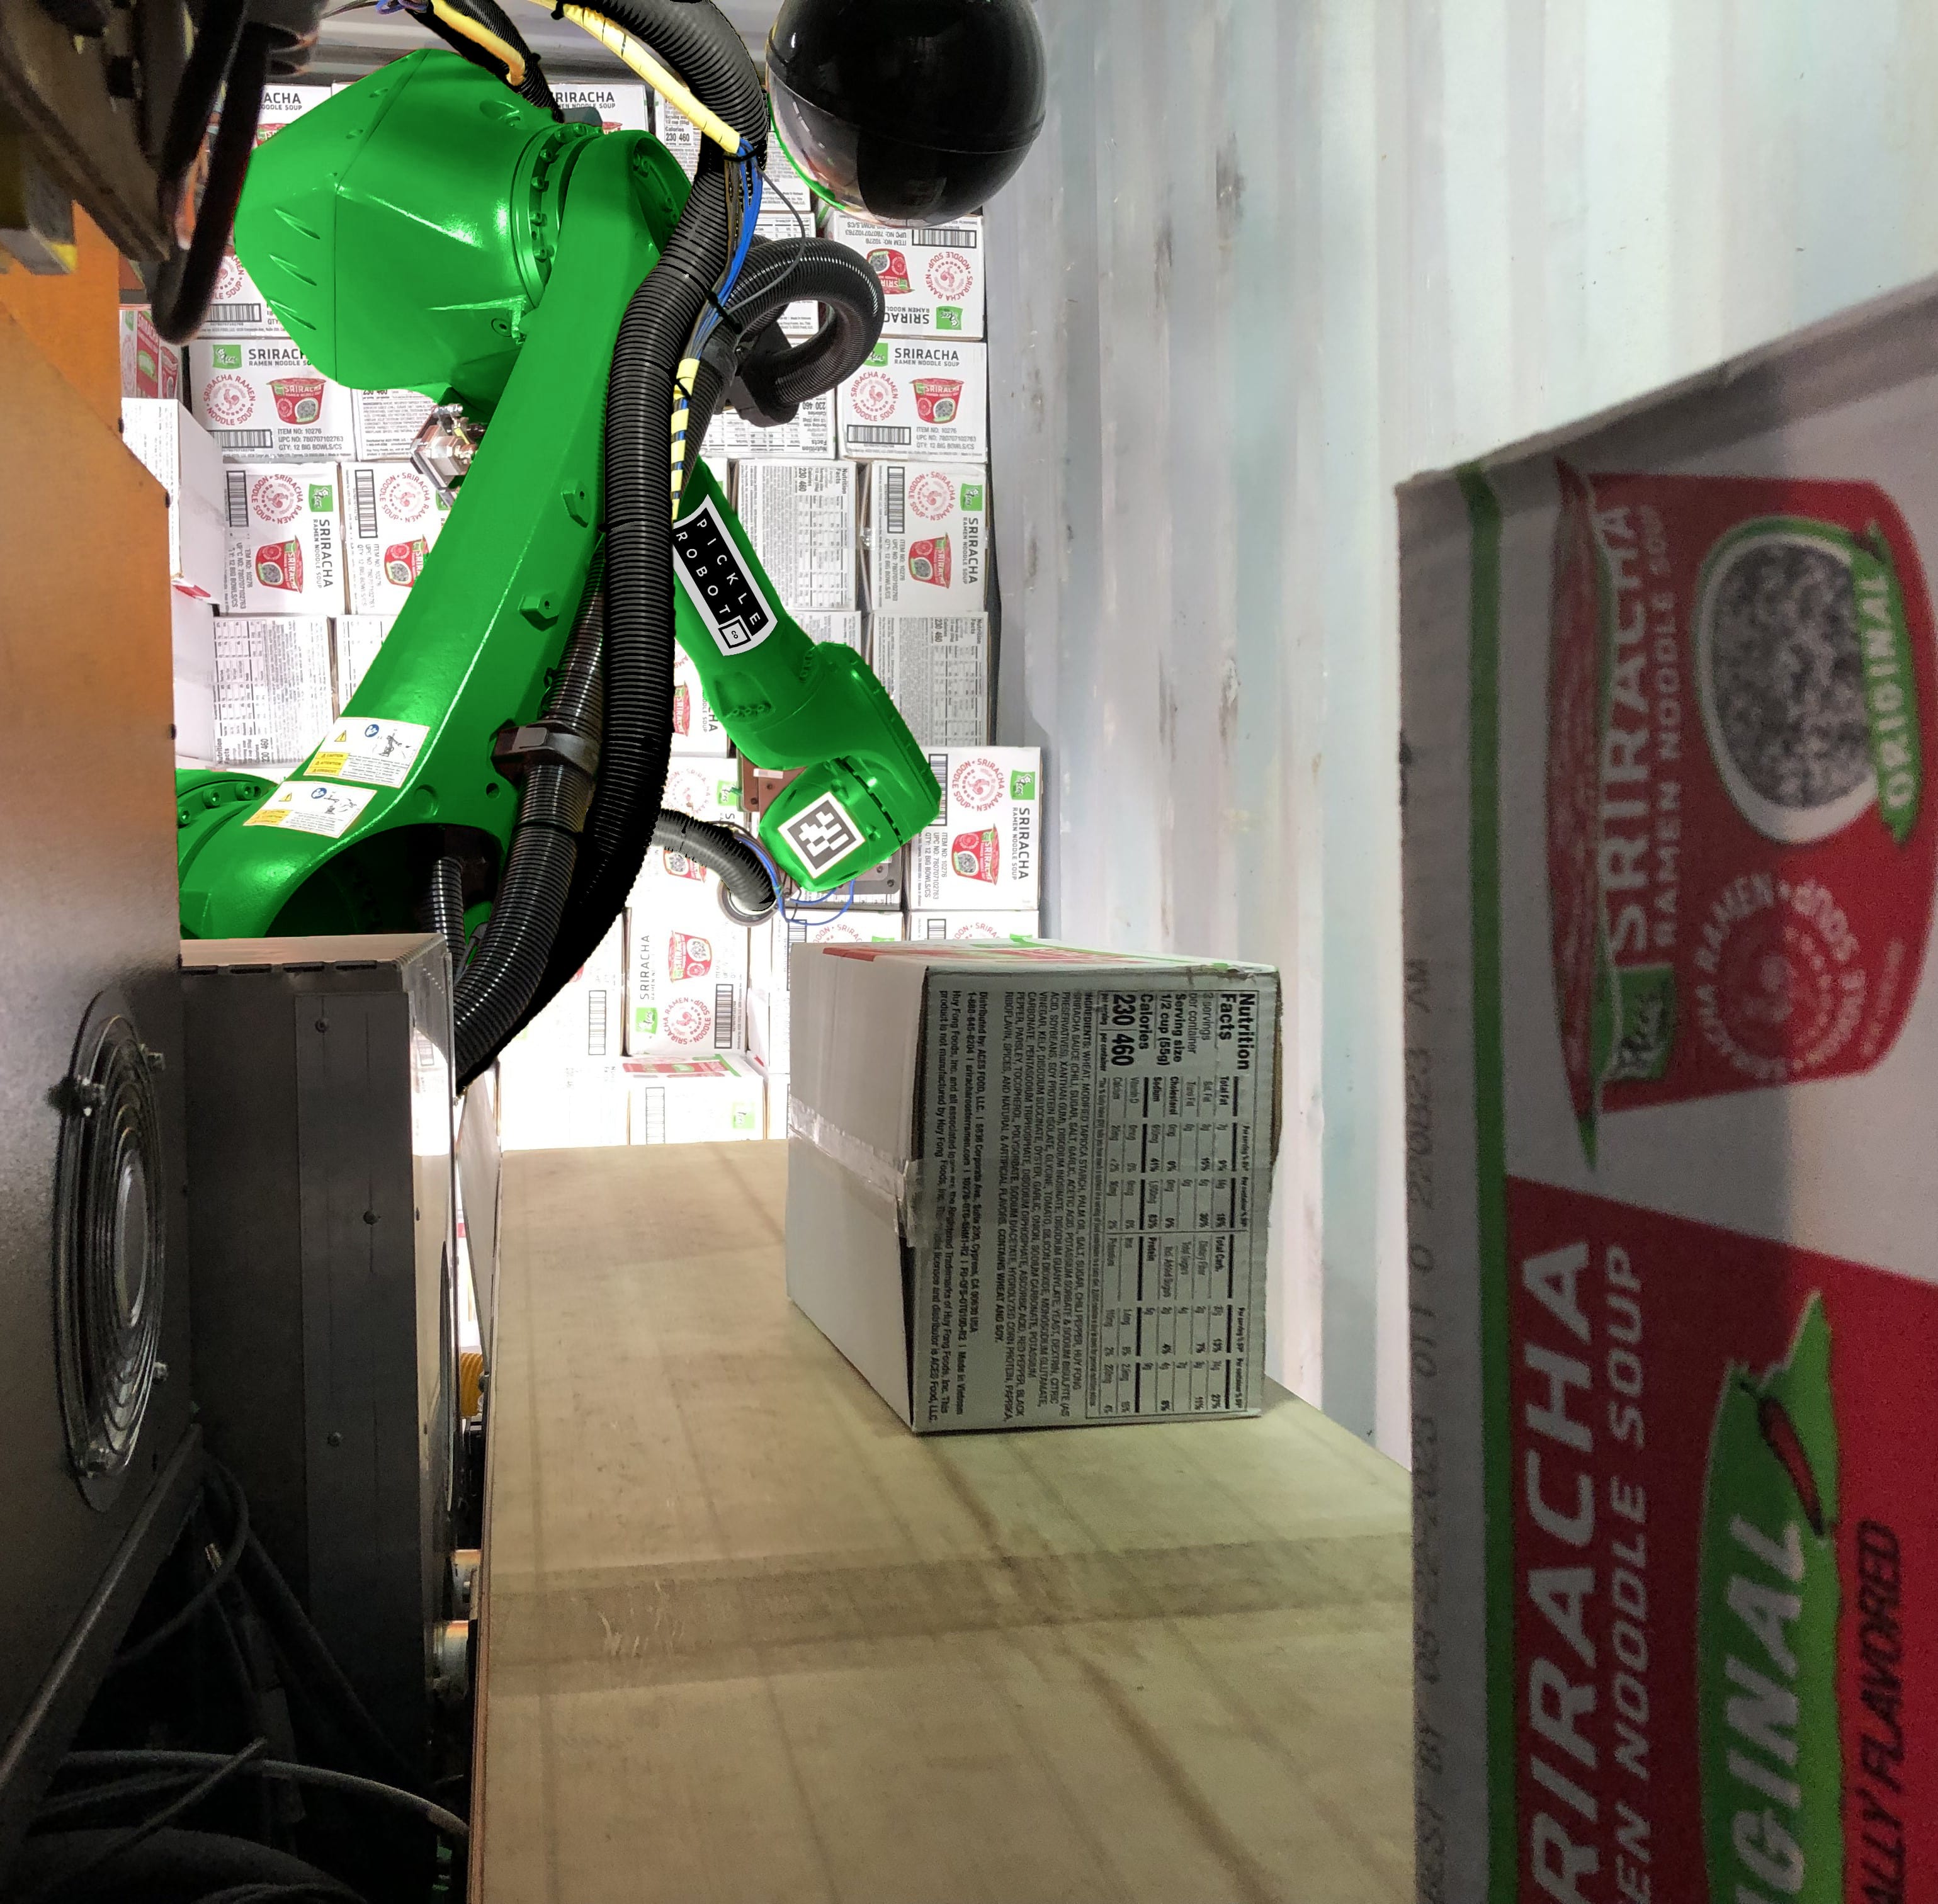 Pickle Robot unloading a Contaner at UEC box placed to conveyor min